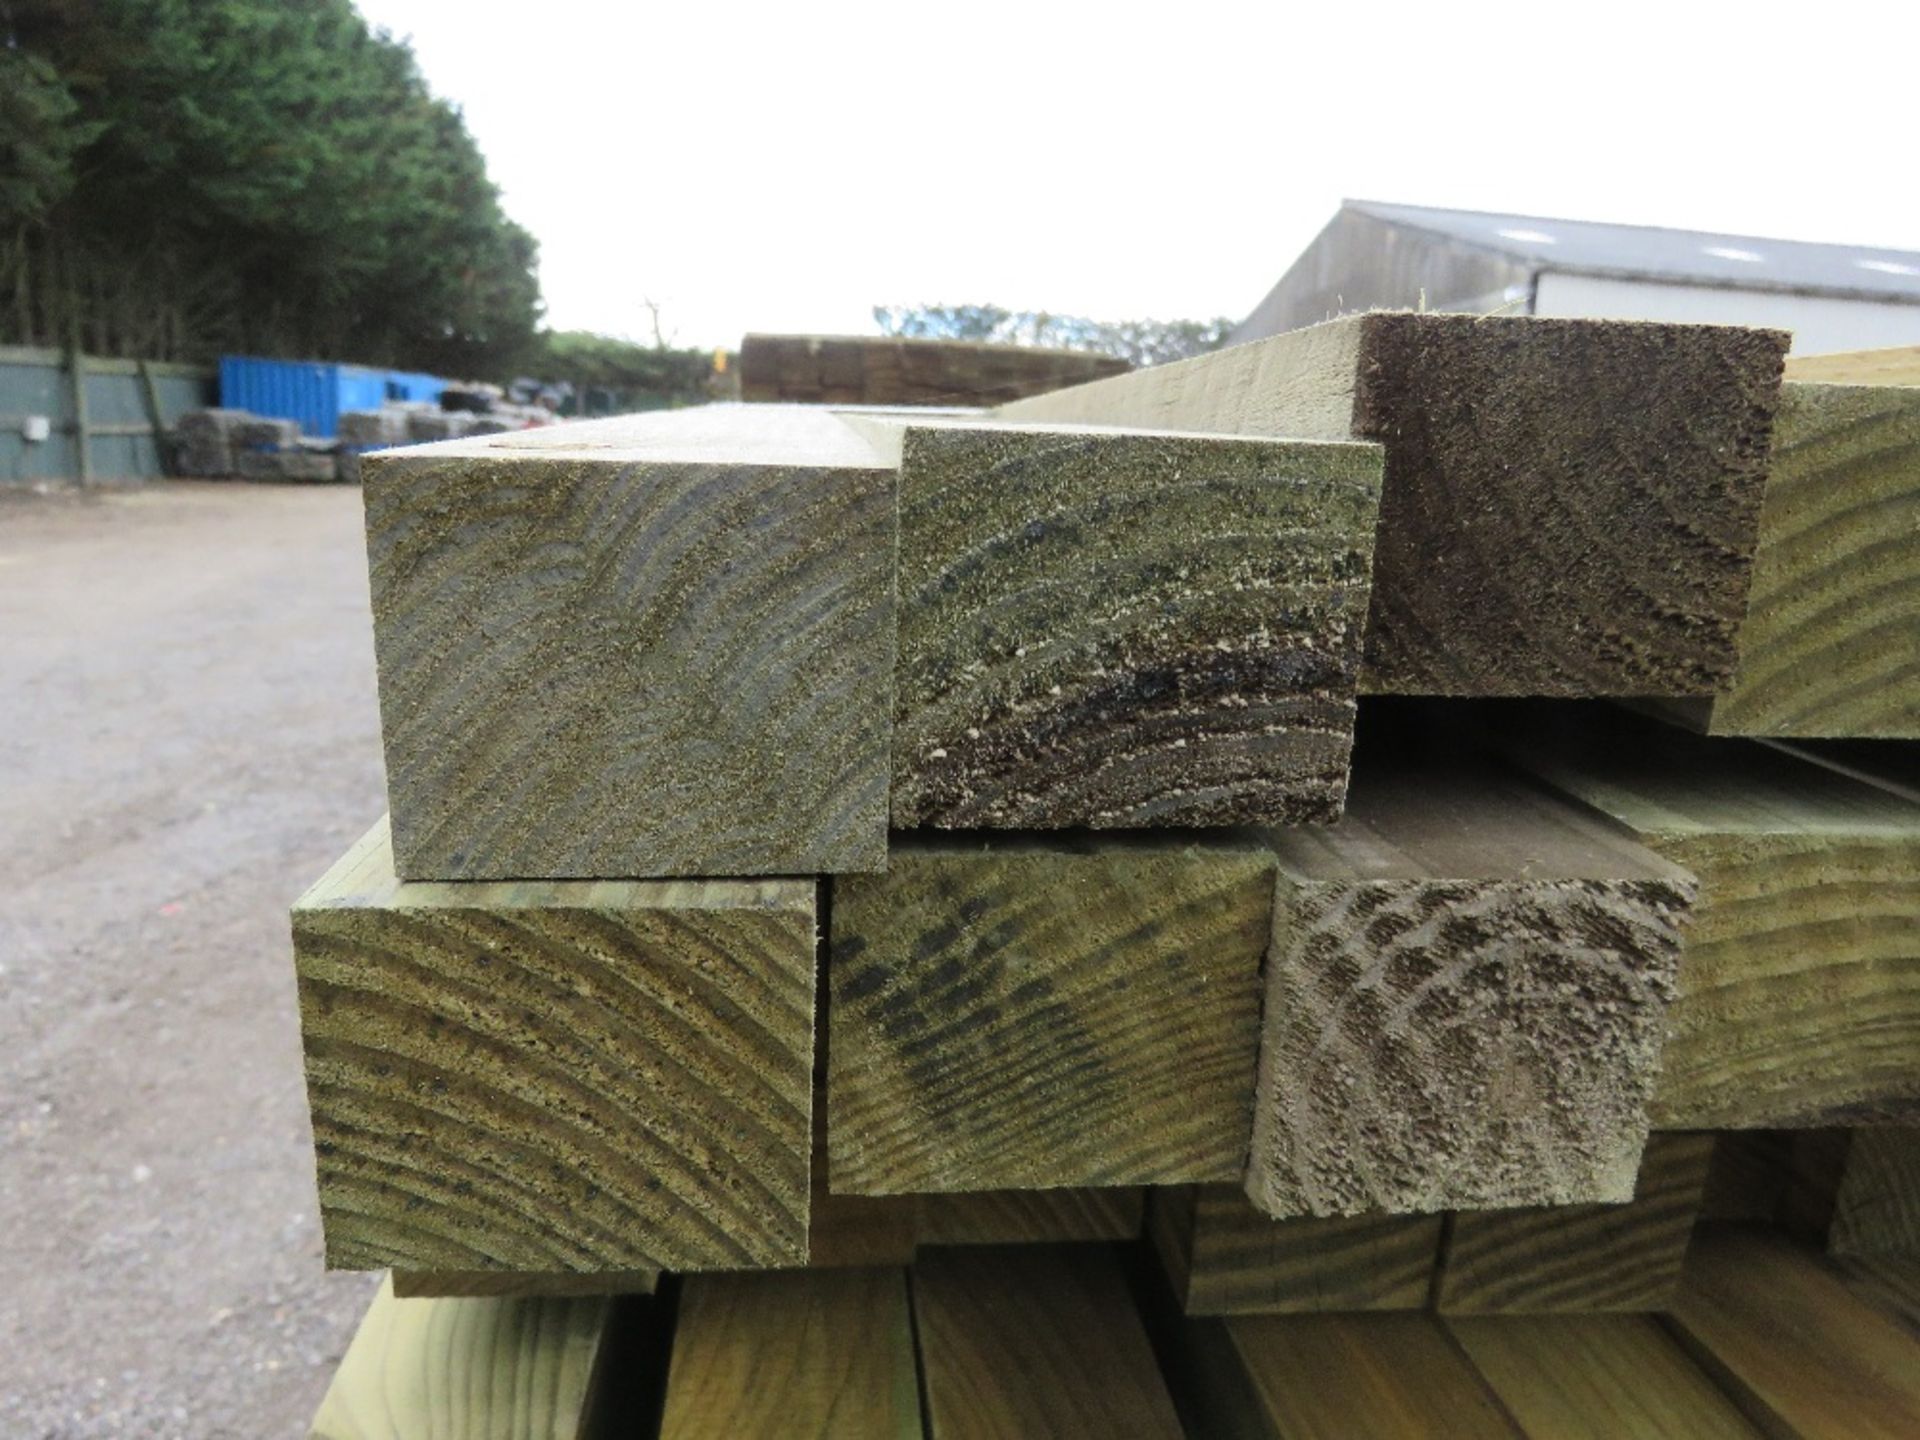 BUNDLE OF APPROXIMATELY 192NO WOODEN BATTENS 55MM X 45MM APPROX @ 2.2-2.7M APPROX. - Image 3 of 3